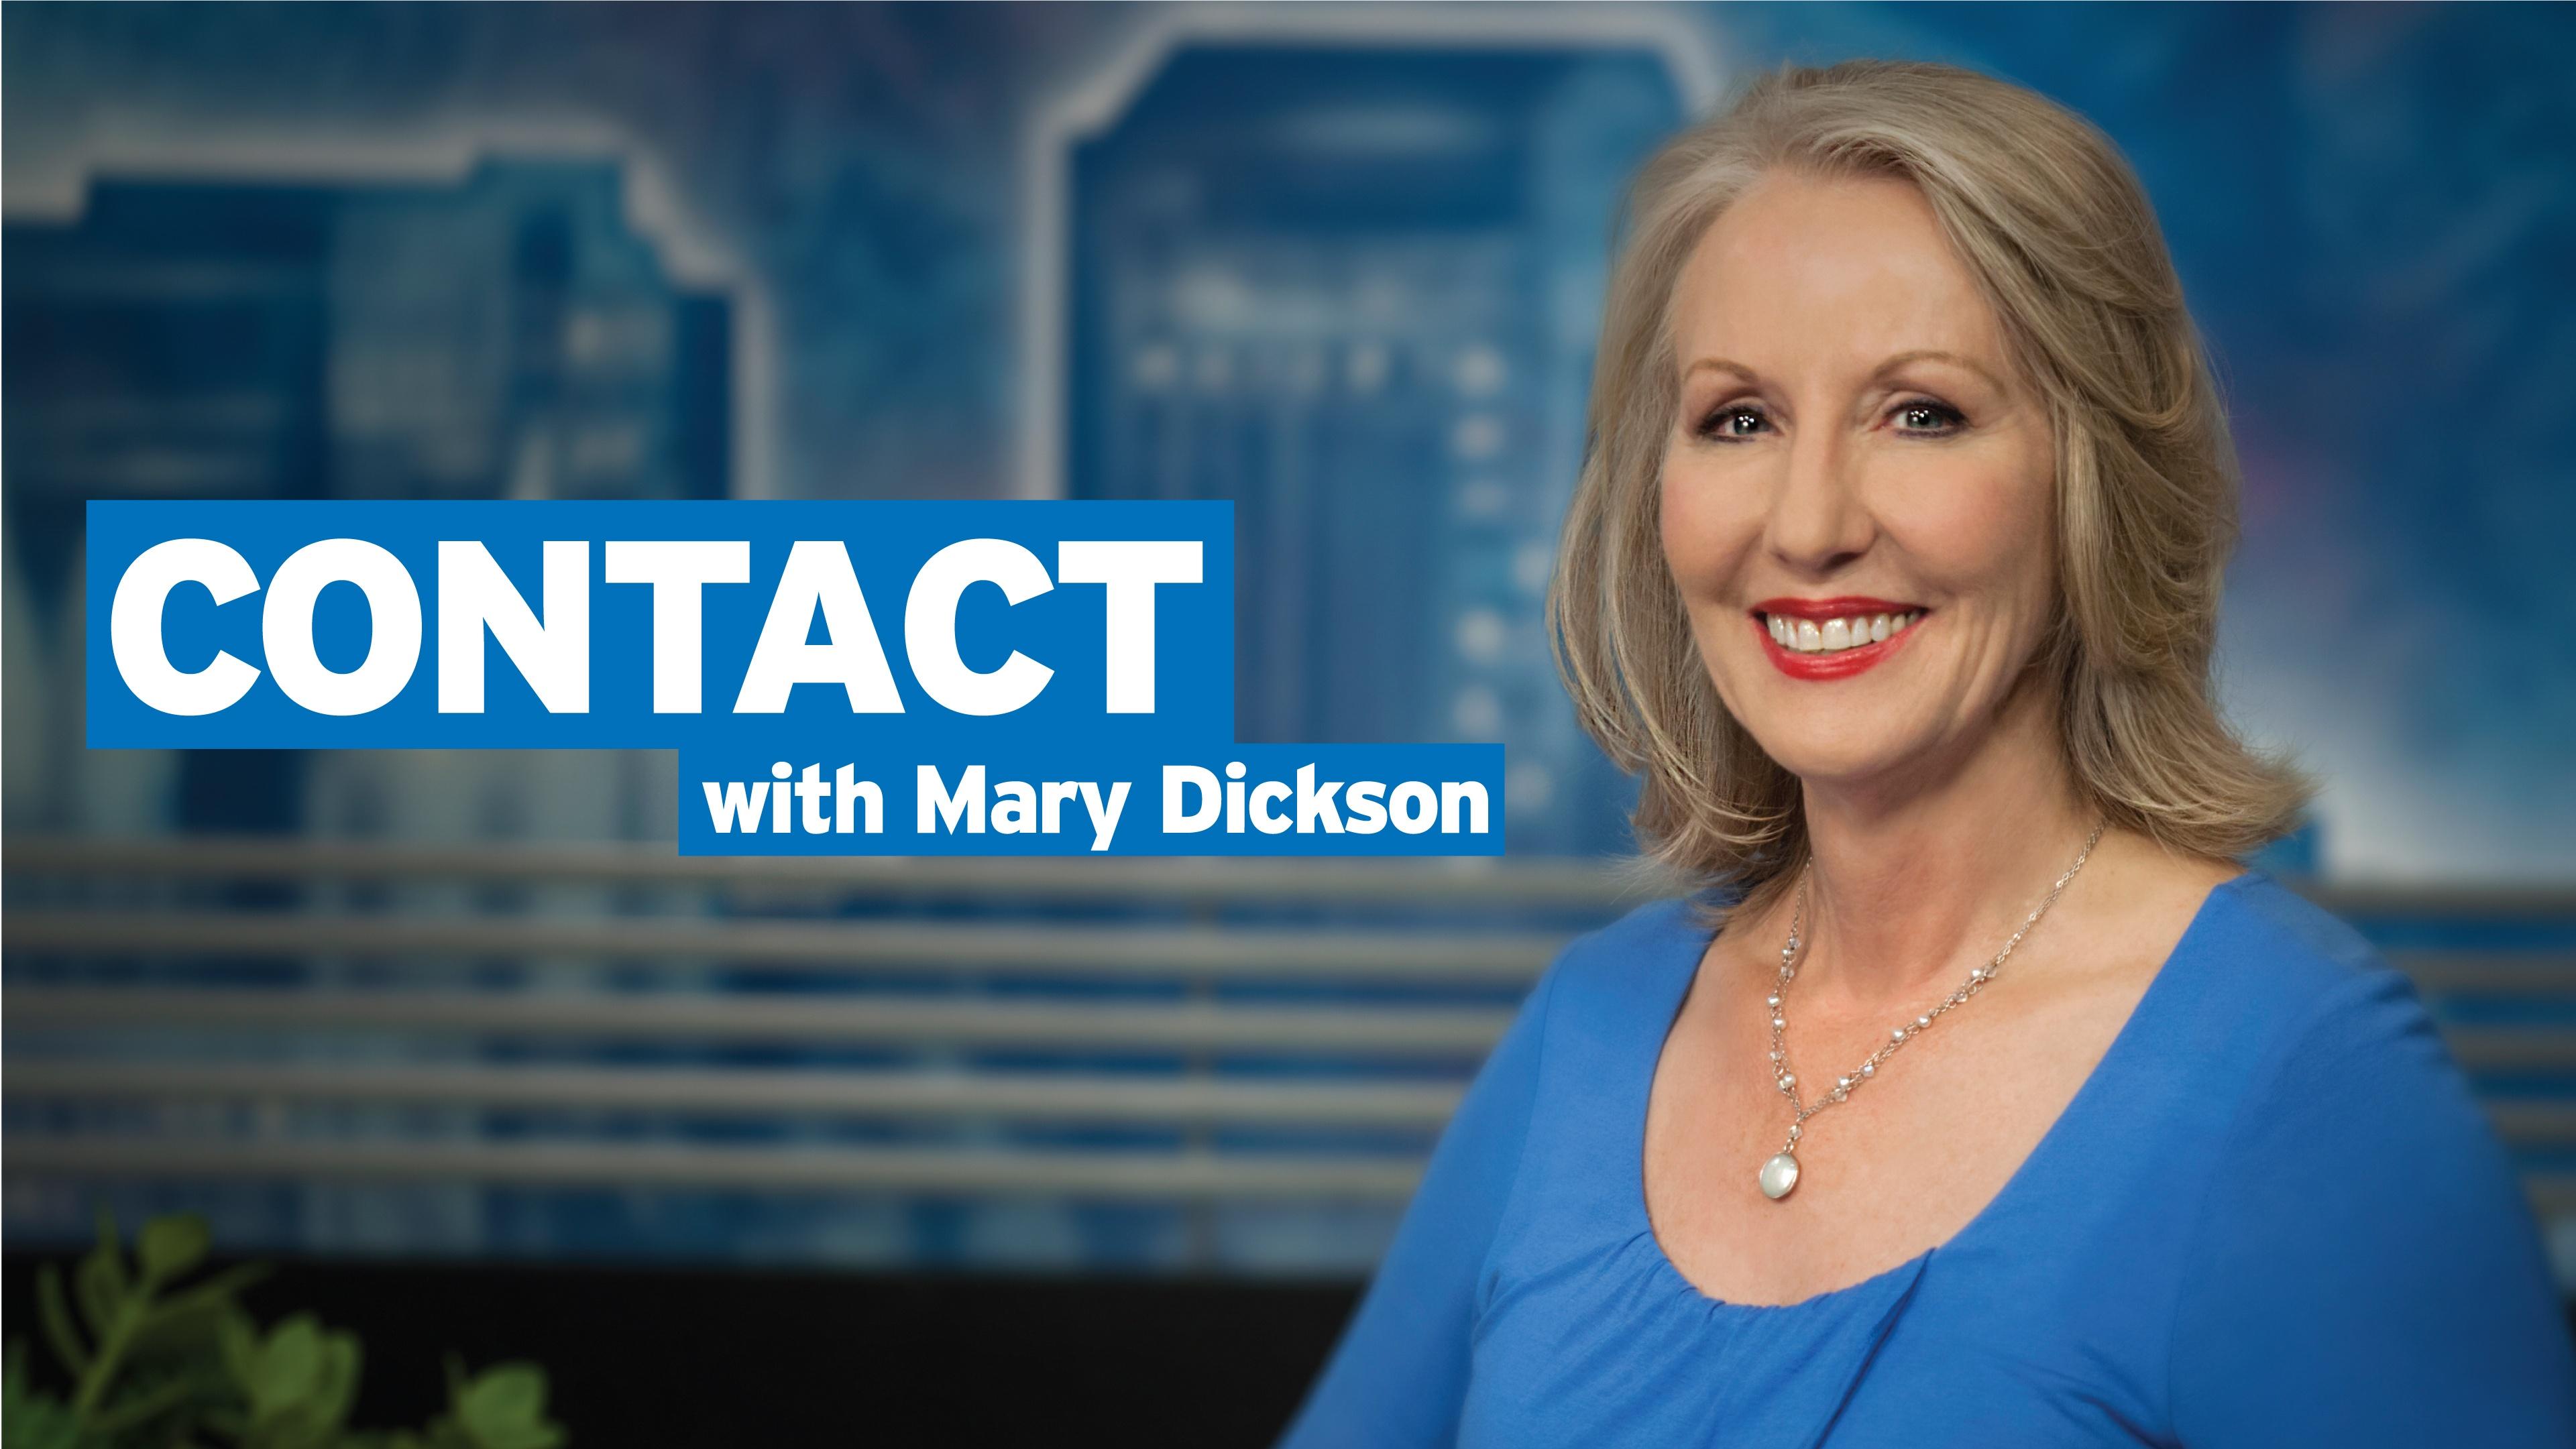 Contact with Mary DIckson, image of Mary Dickson